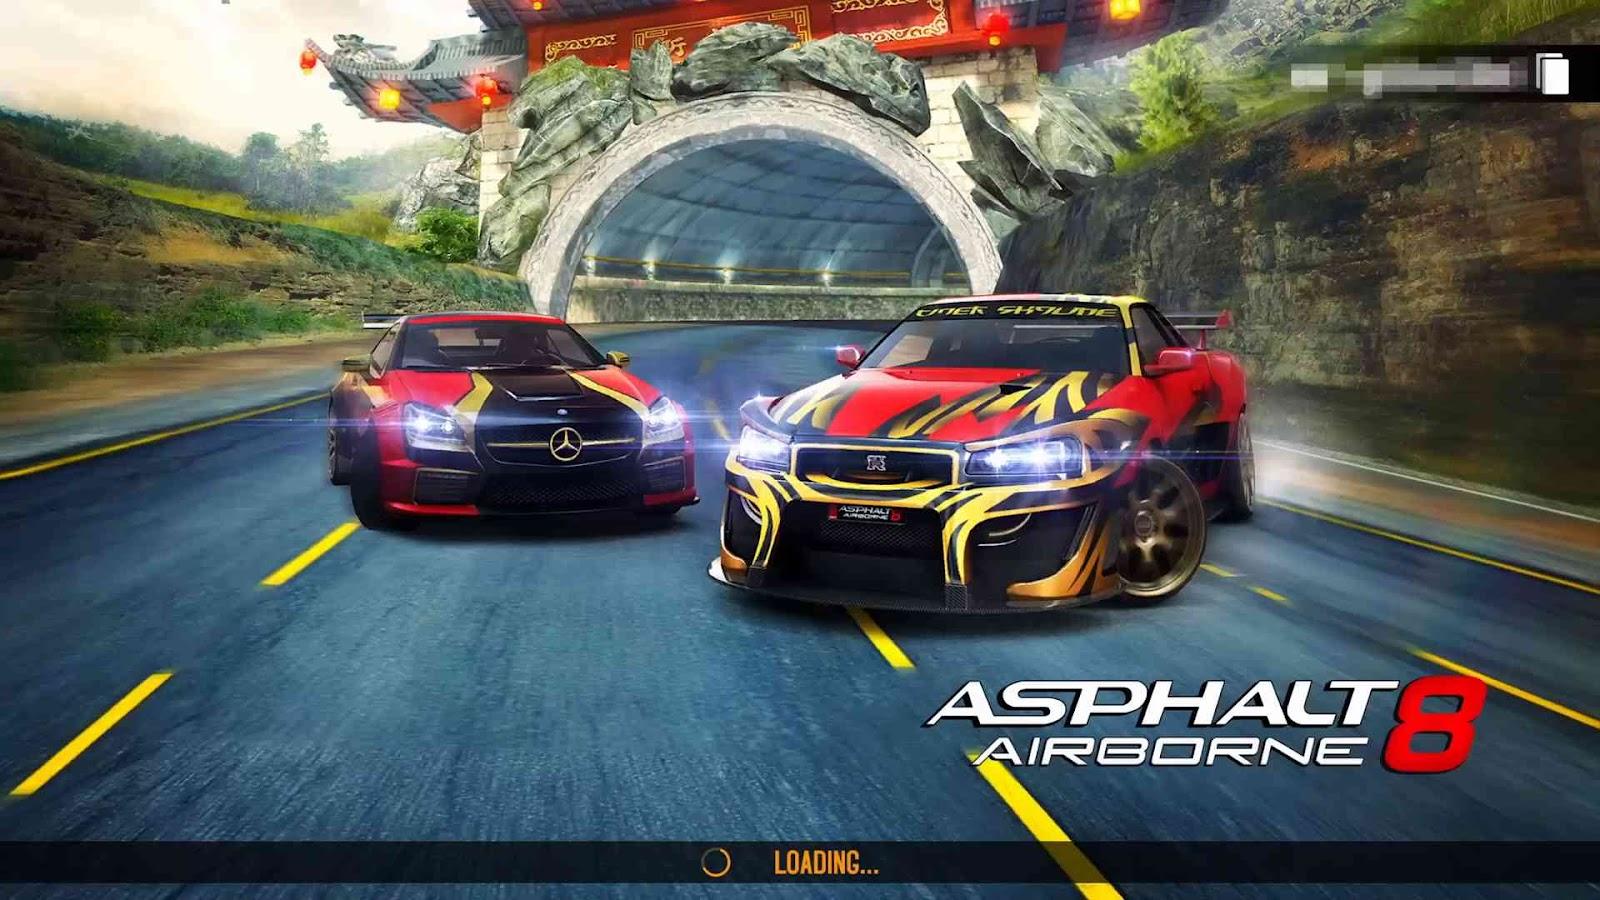 6 Best Offline Multiplayer Racing Games for Android - Tech Blog